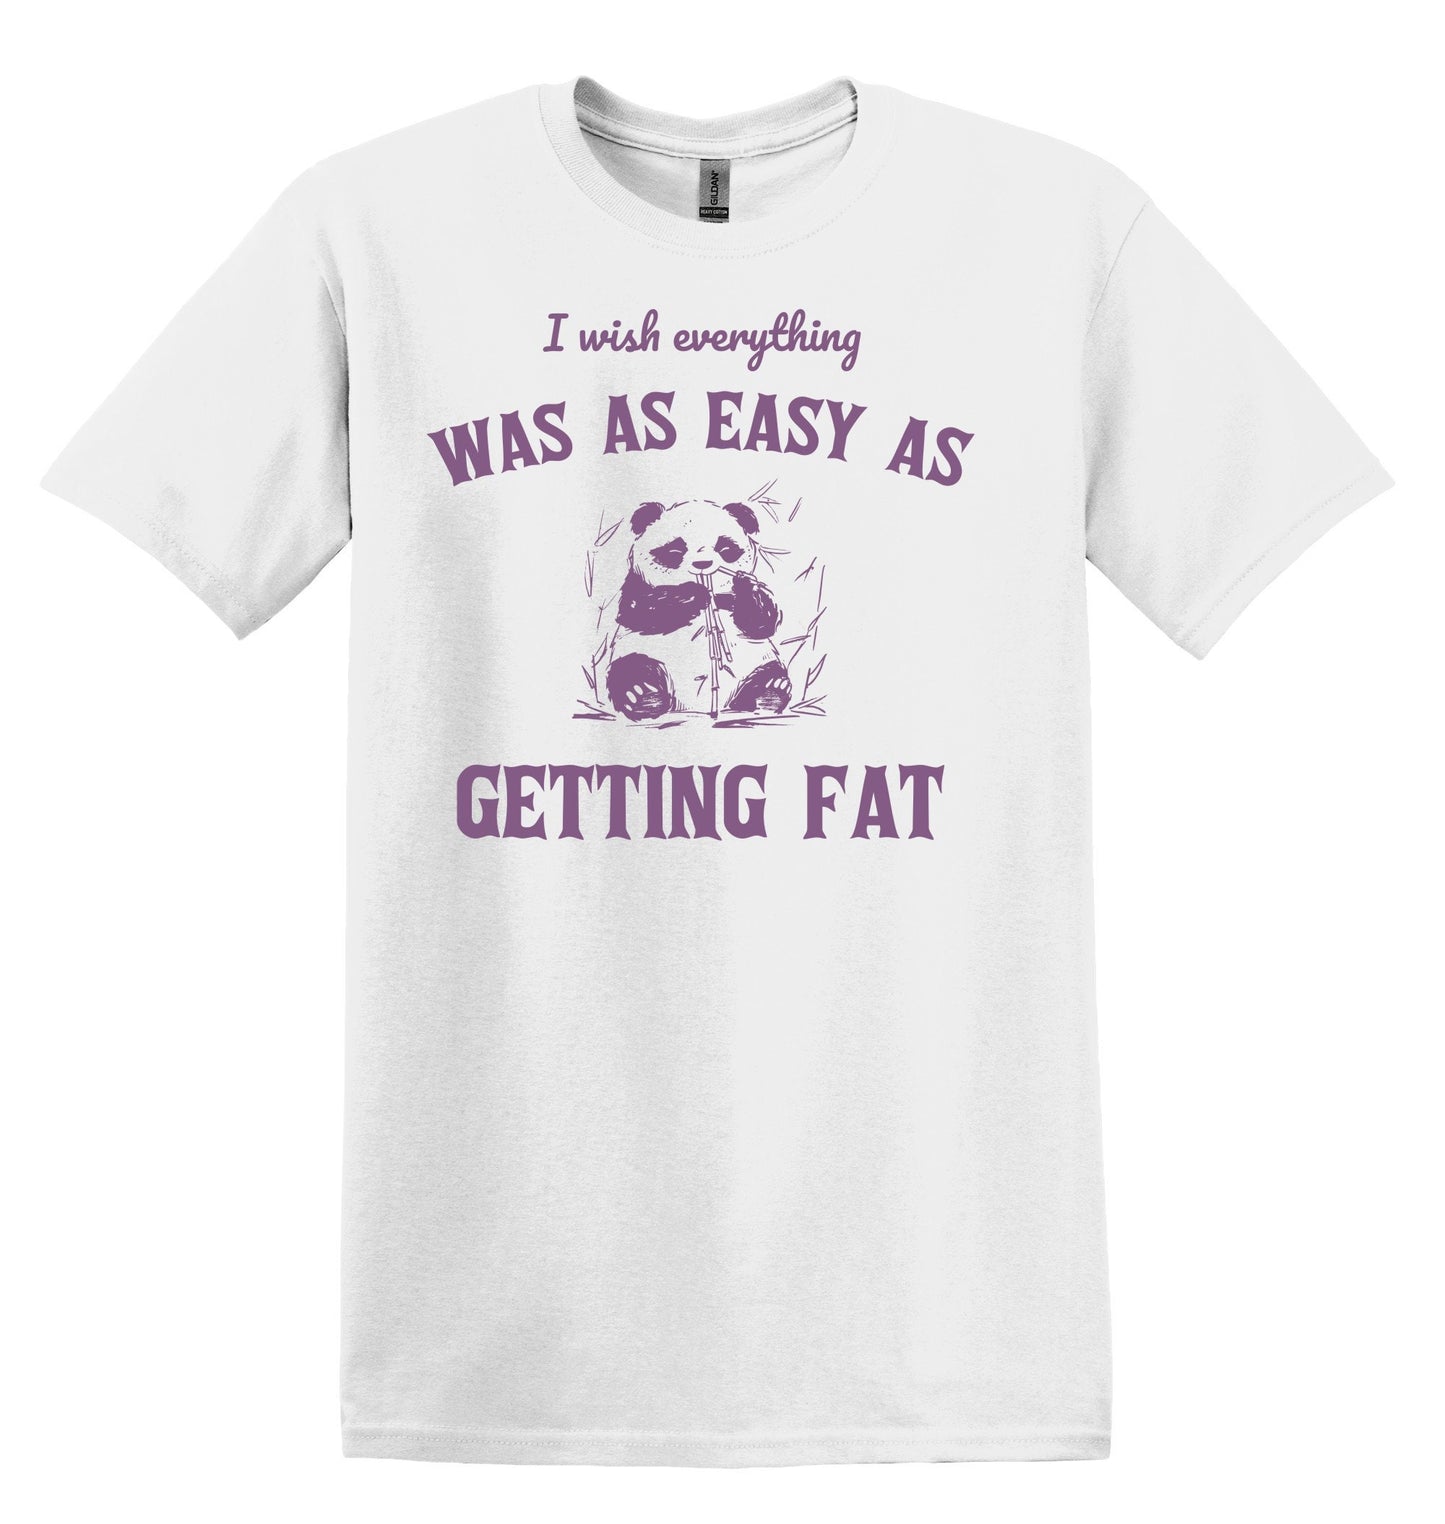 I Wish Everything was as Easy as Getting Fat Shirt Graphic Shirt Funny Shirt Vintage Funny TShirt Nostalgia T-Shirt Relaxed Cotton Shirt